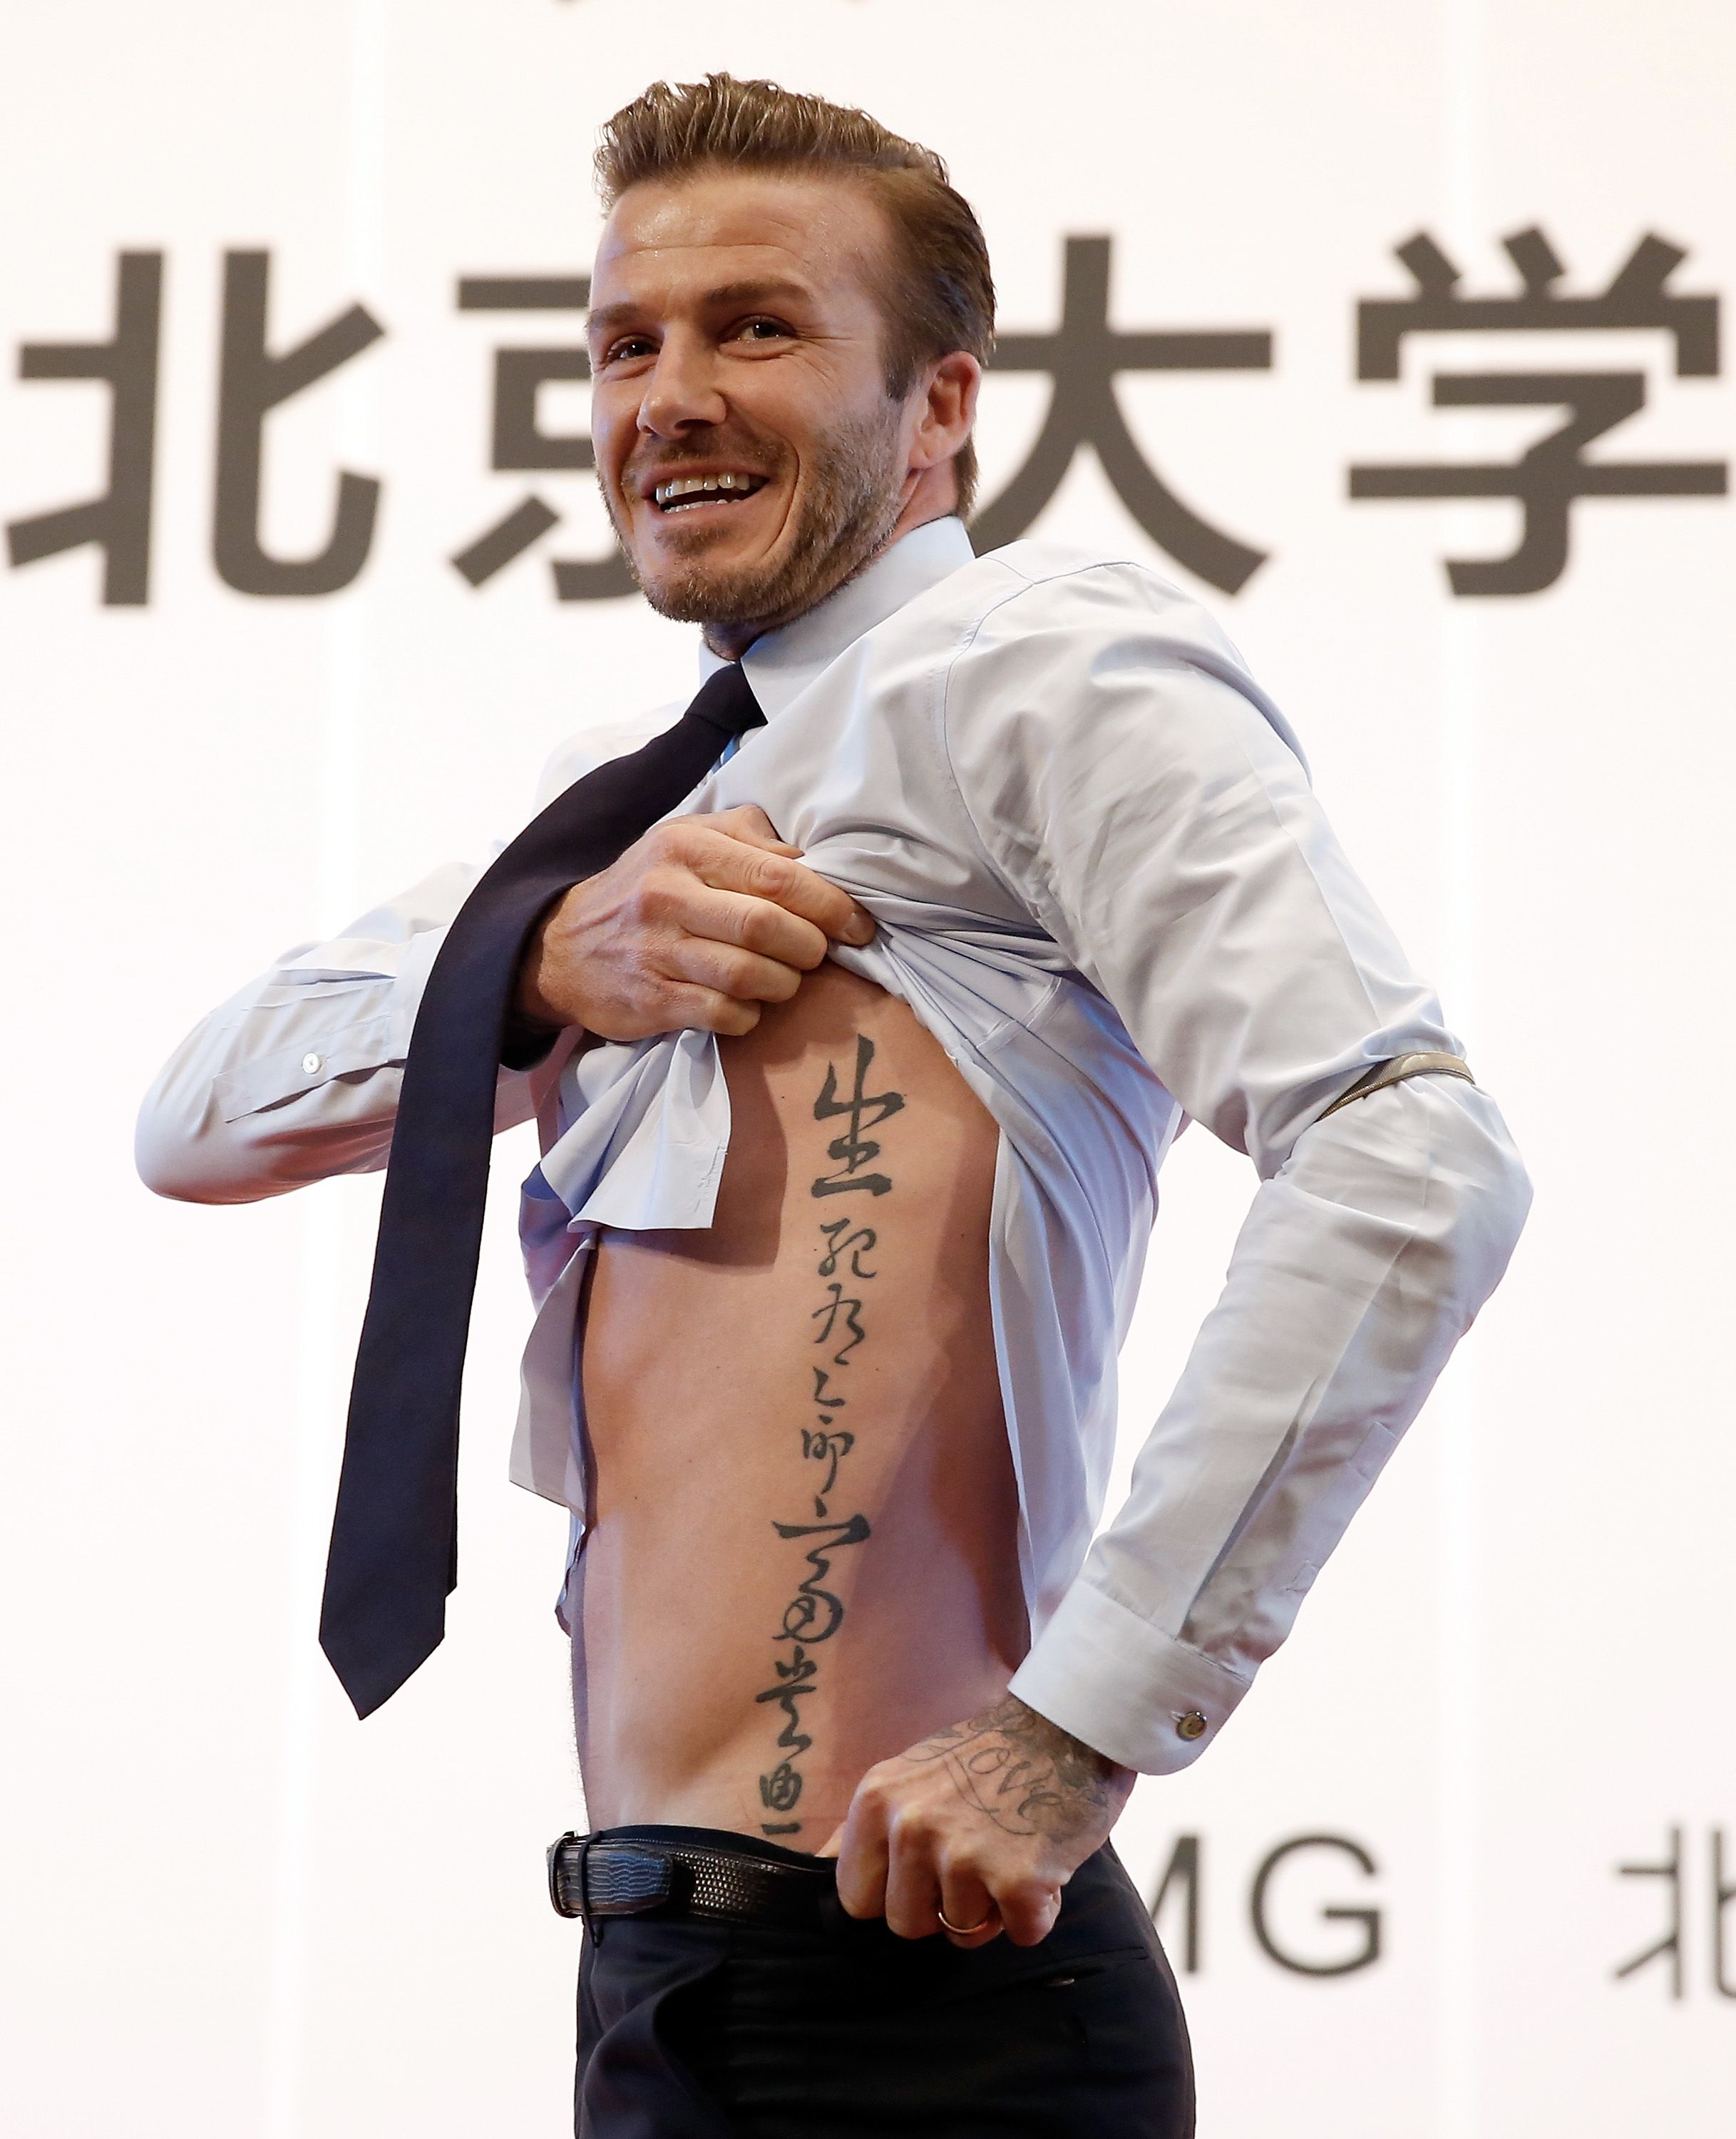 How much does a back Chinese character tattoo cost? - Quora